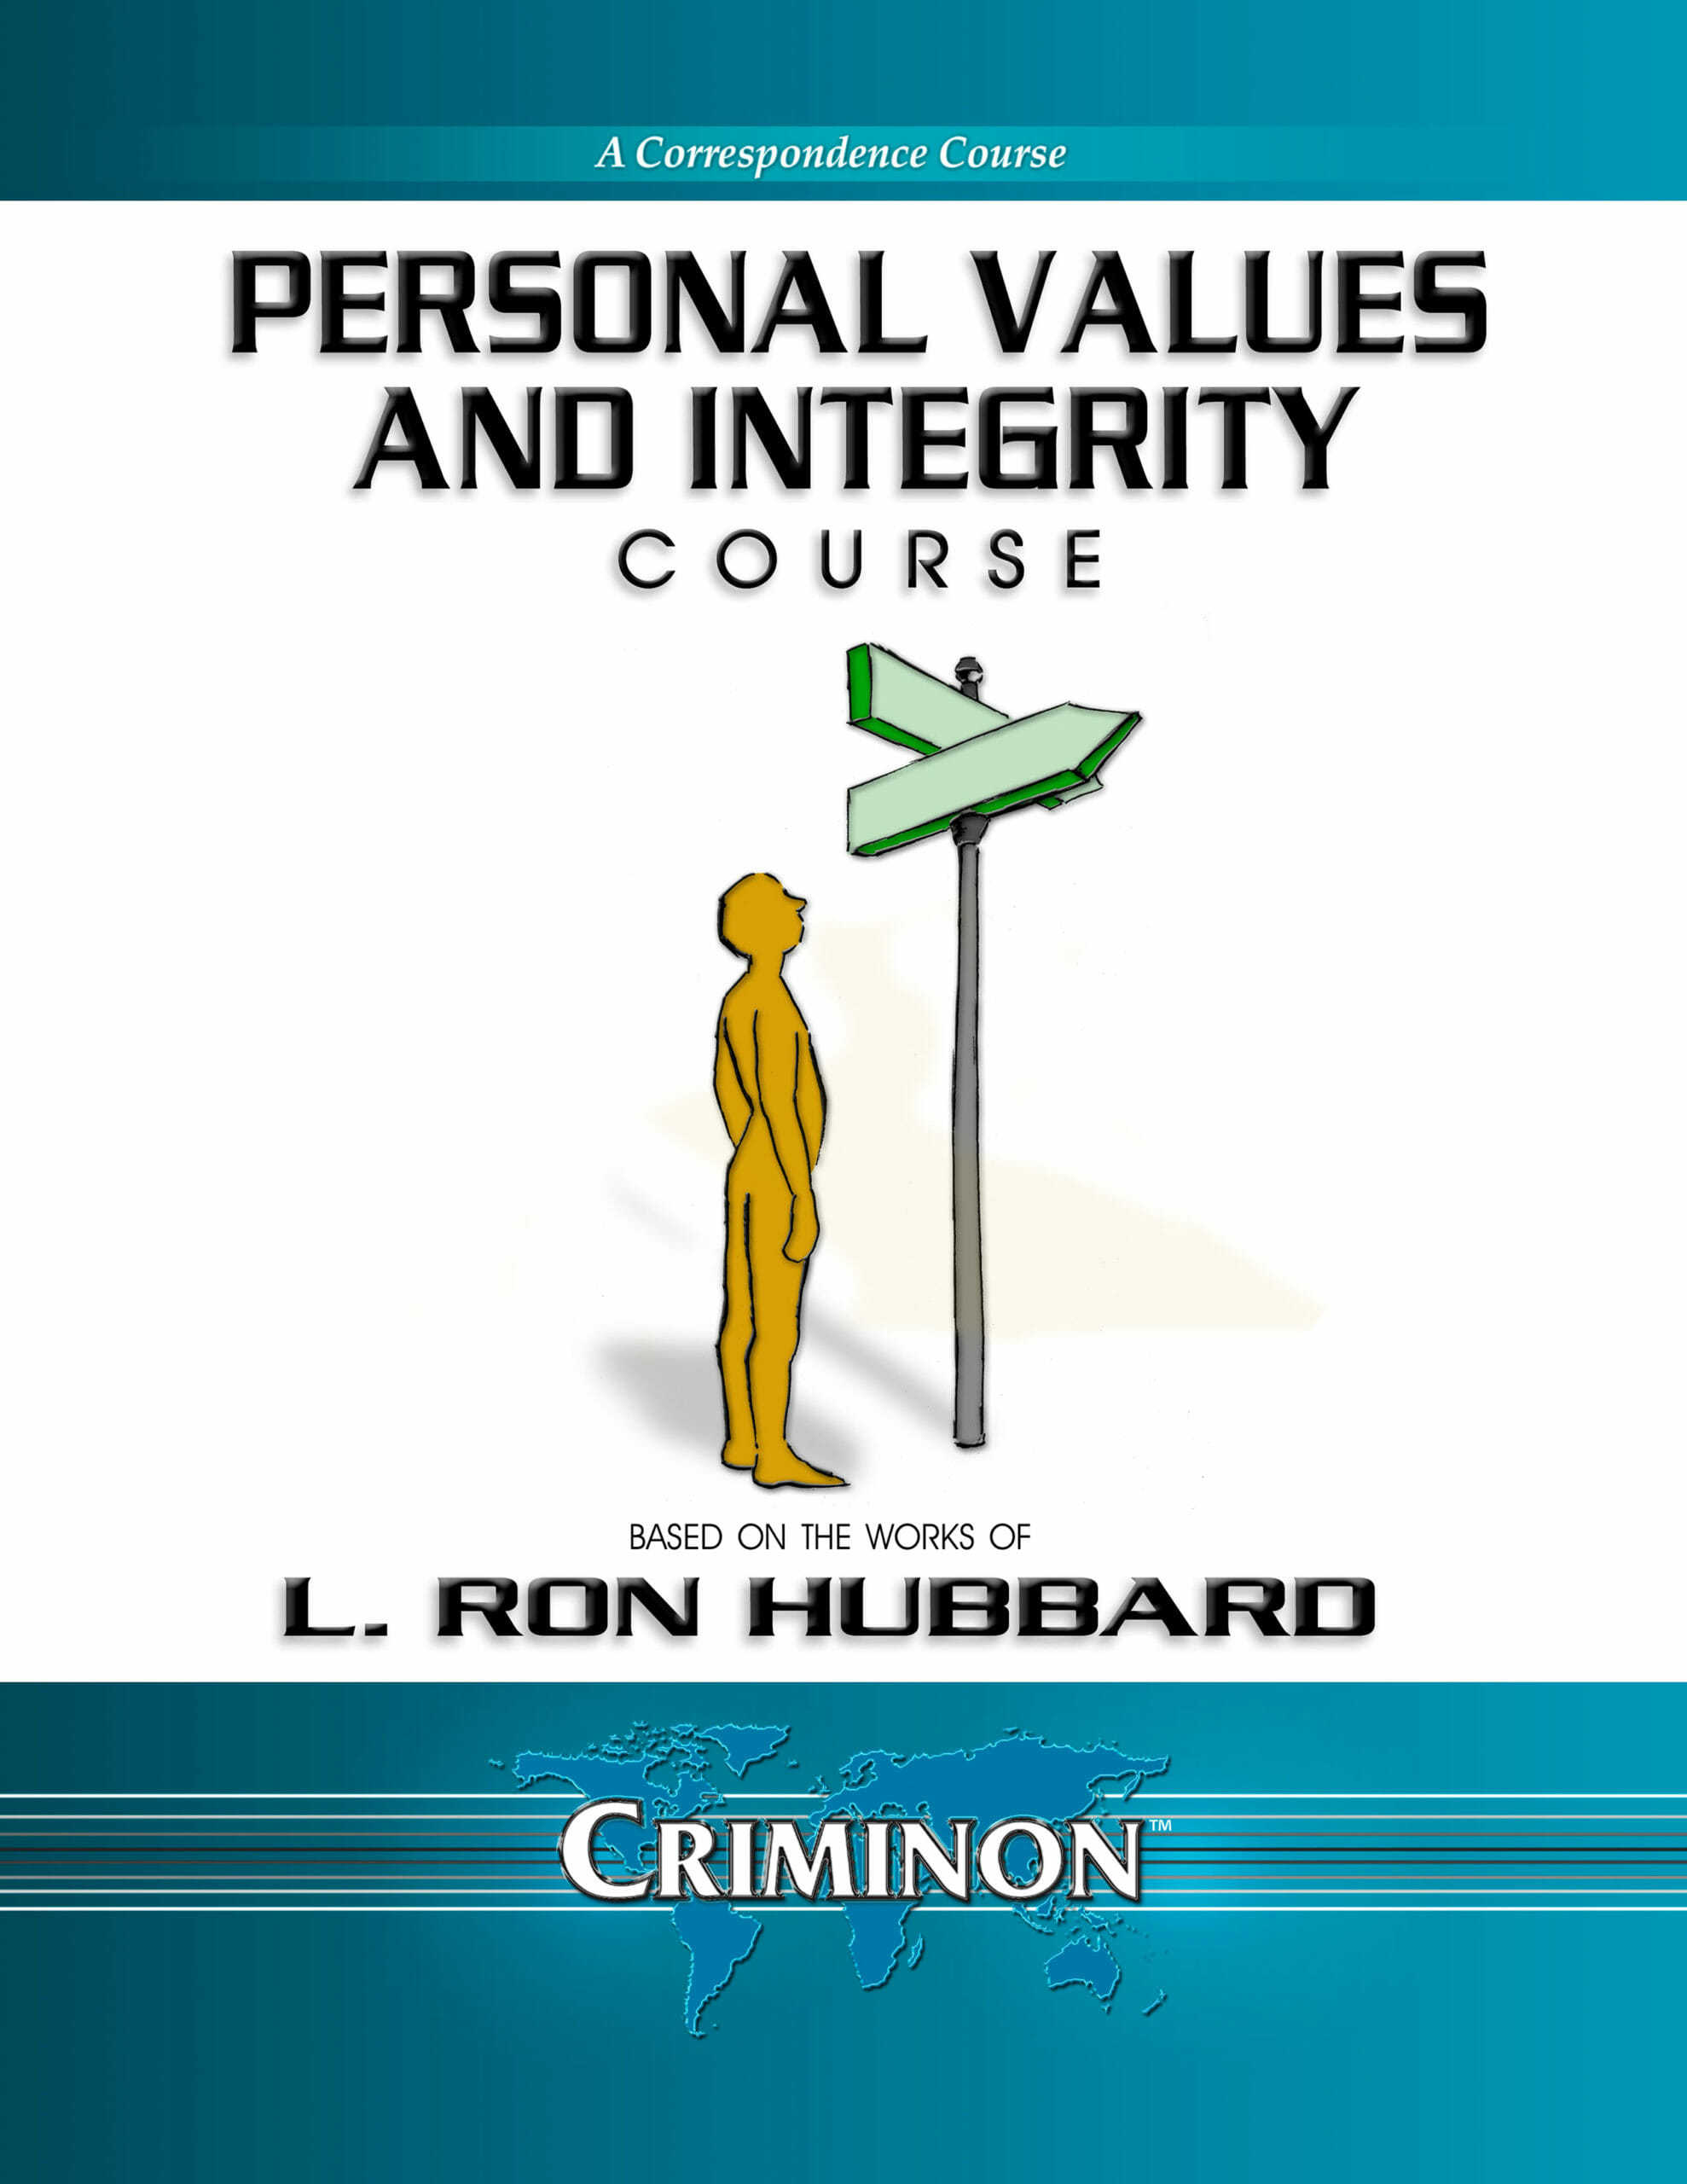 Personal Values and Integrity Course - Criminon